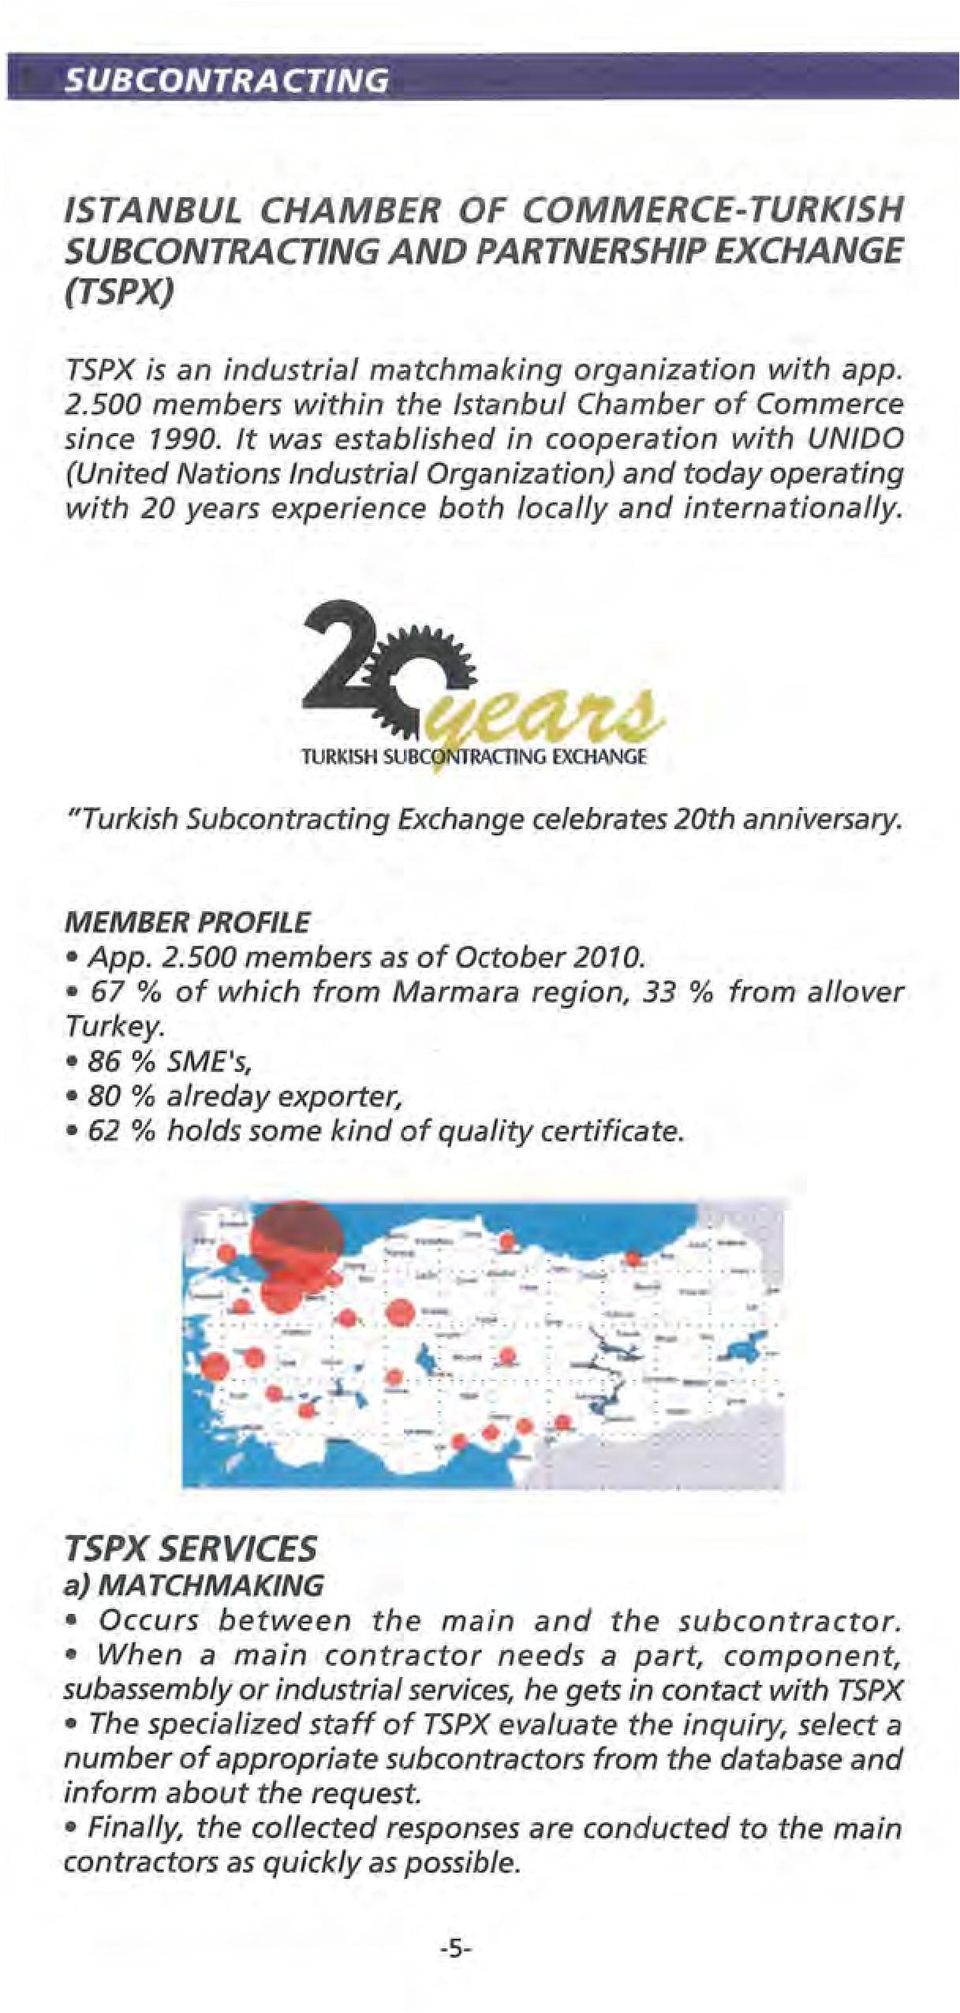 lt was established in cooperation with UN/DO (United Nations lndustrial Organization) and today operating with 20 years experience both locally and internationally. ır~ TURKISH SUBCO.